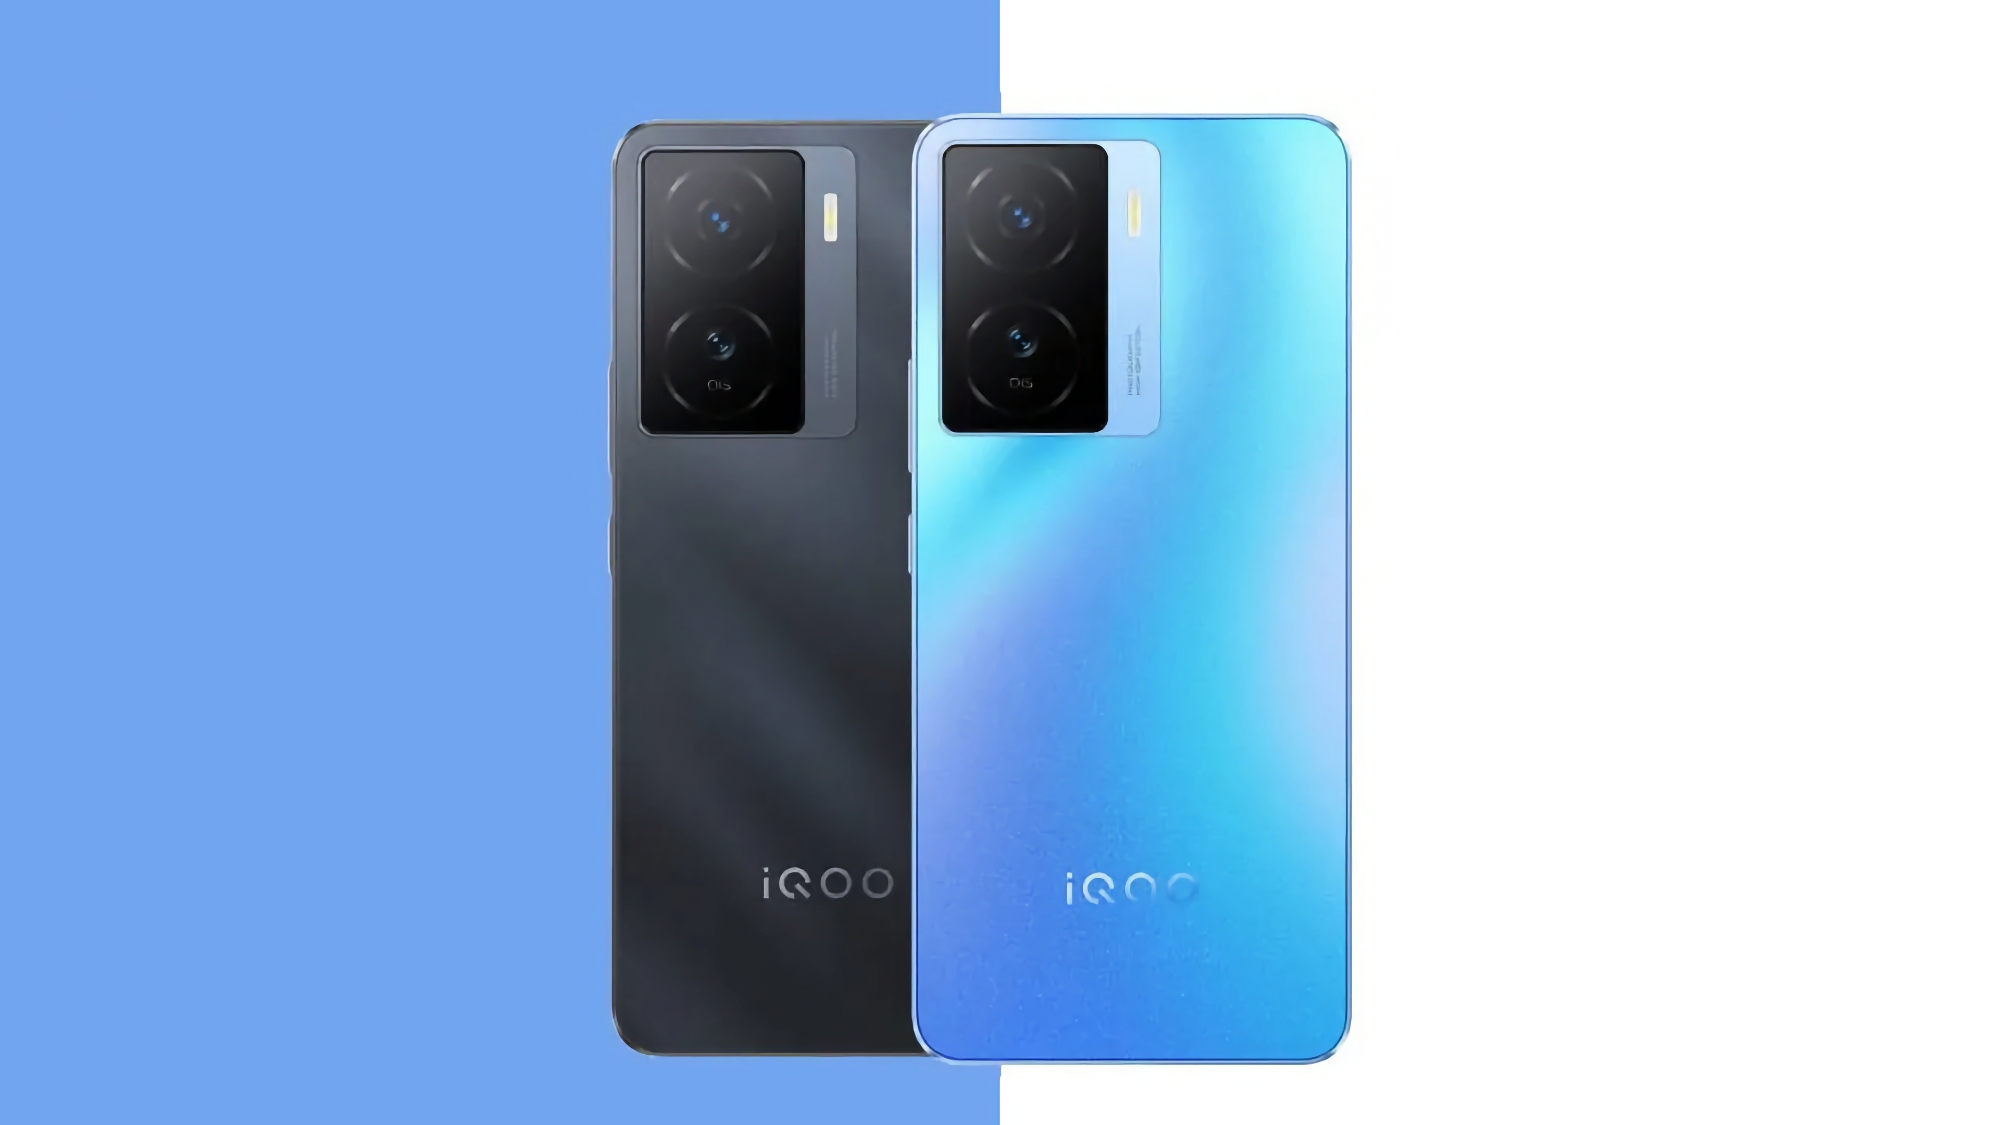 iQOO Z7s 5G: 90Hz AMOLED display, Snapdragon 695 chip and 64MP camera for $229